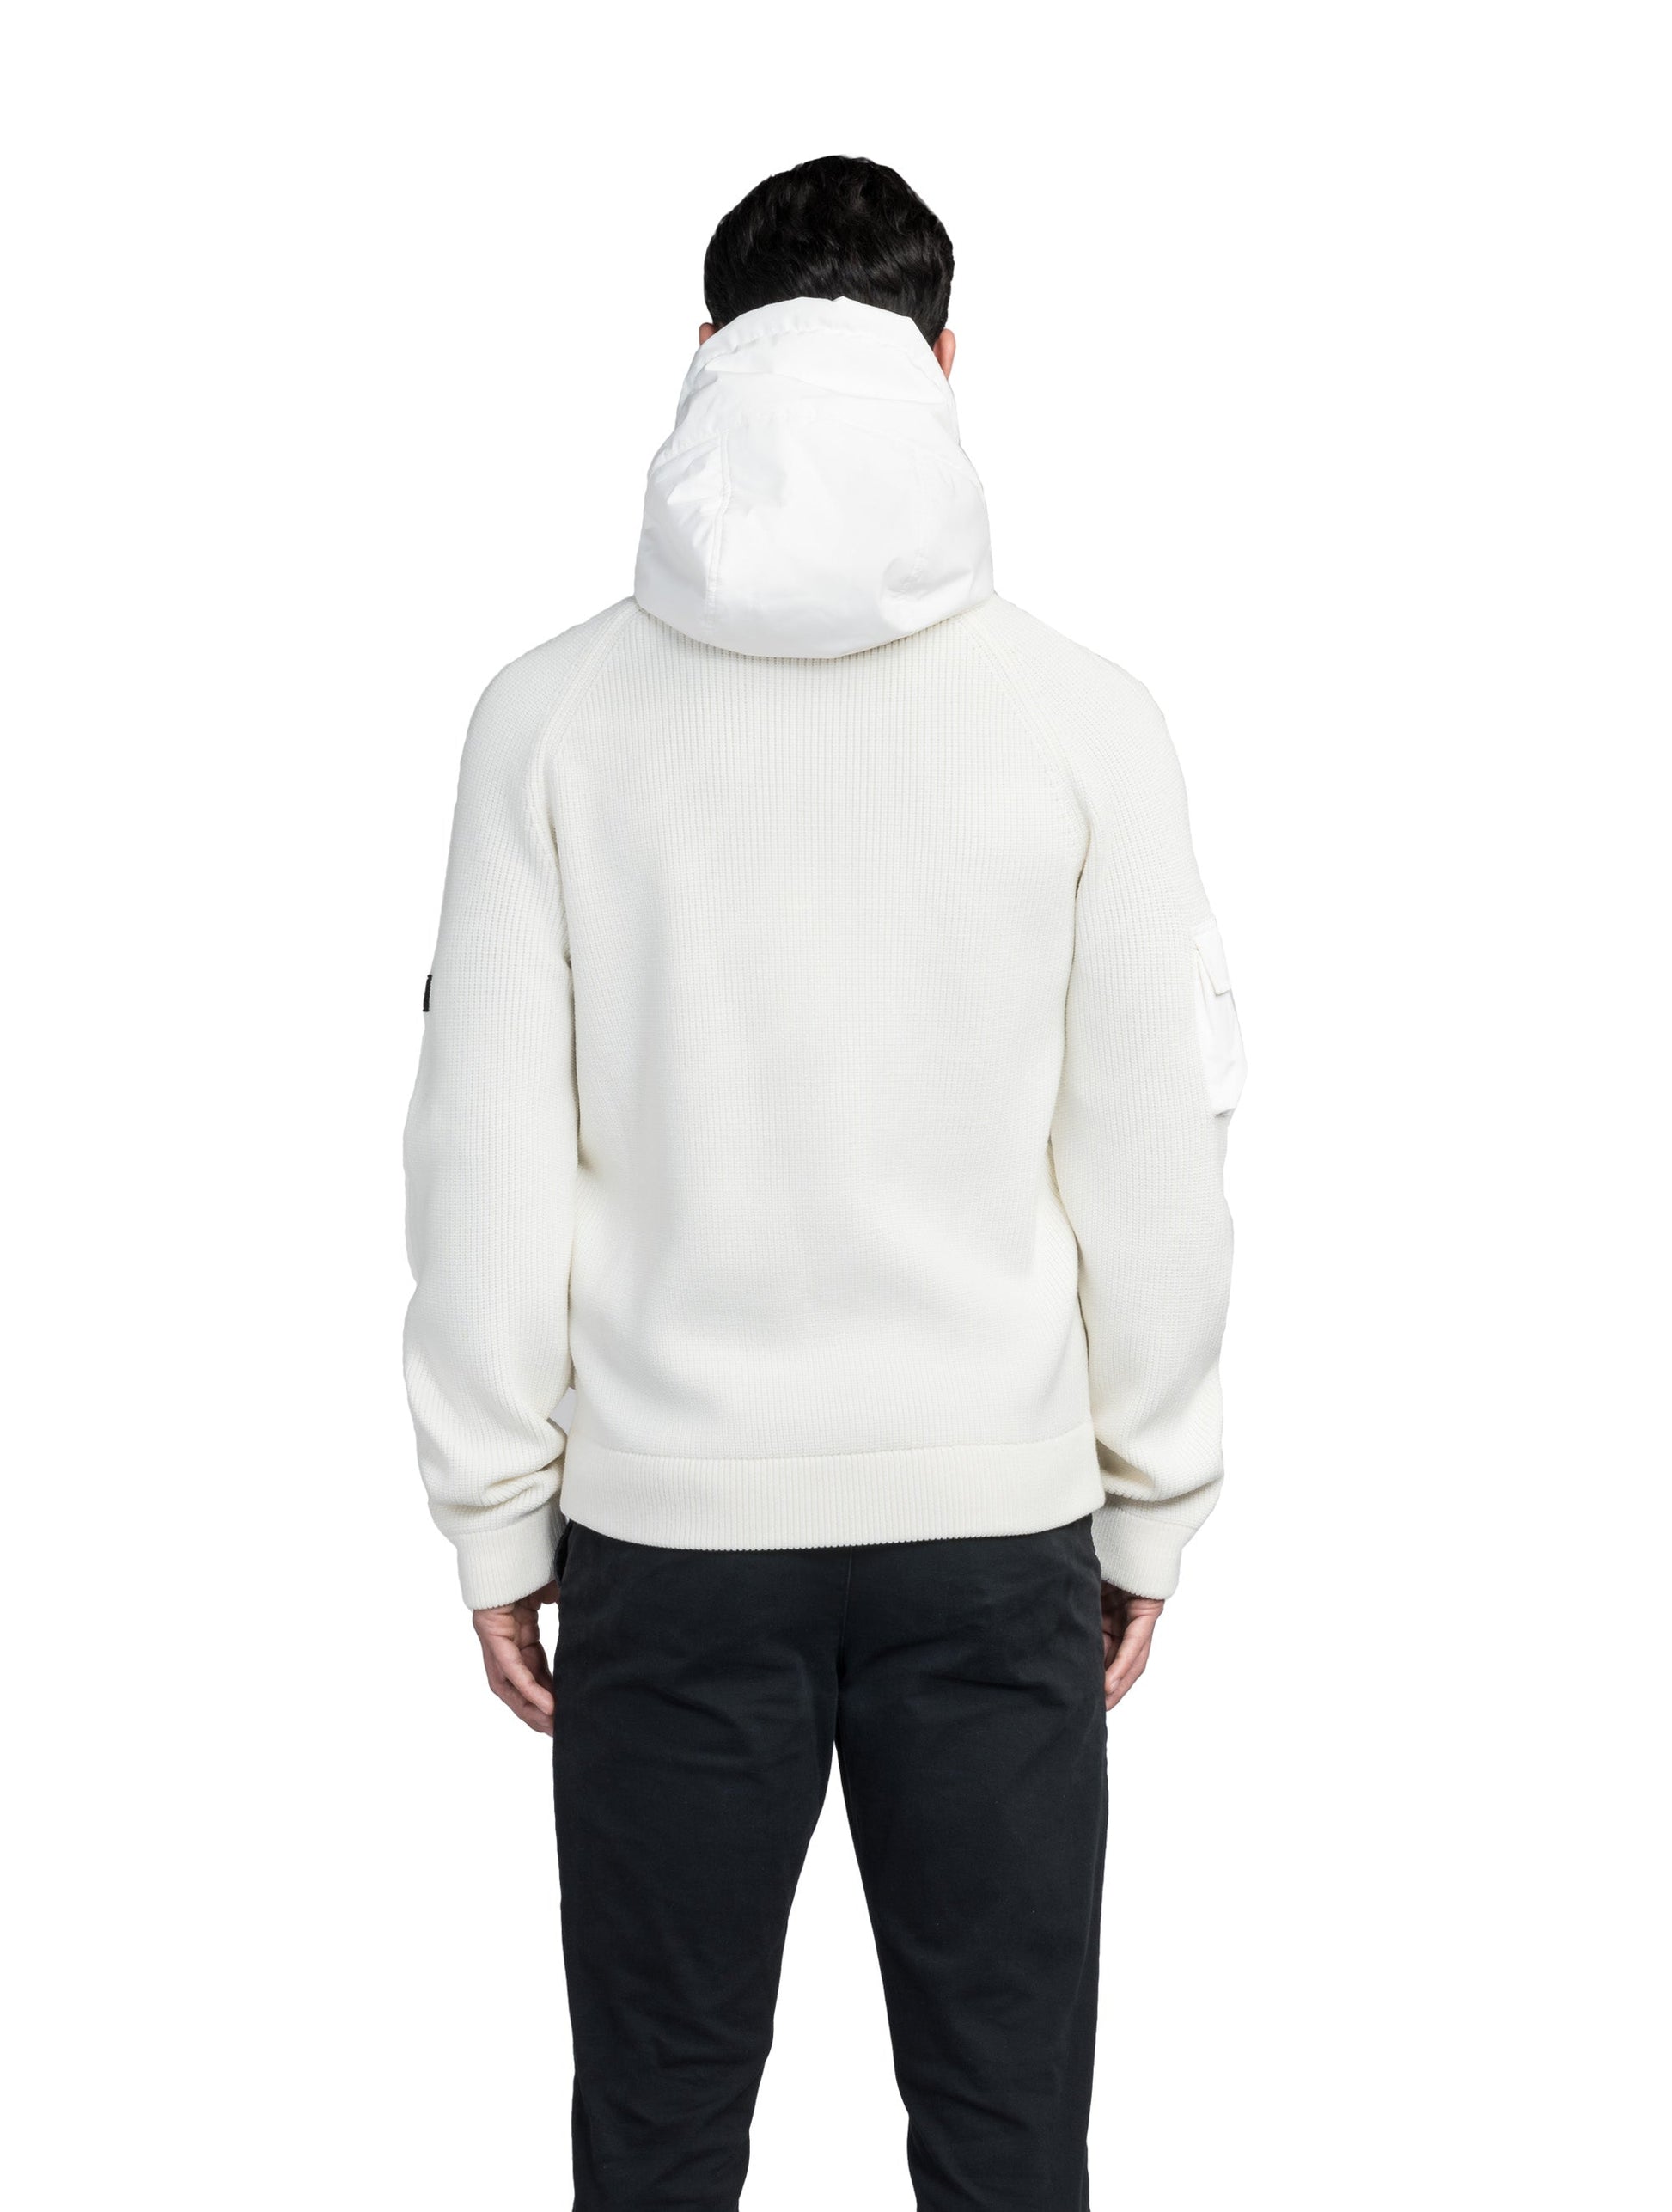 Hedge Men's Performance Hoodie in hip length, premium 3-ply micro denier and 100% virgin extra fine merino wool knit fabrication, Primaloft Gold Insulation Active+, non-removable hood with adjustable drawstrings, two-way centre-front zipper, magnetic closure side-entry pockets at waist, in Chalk